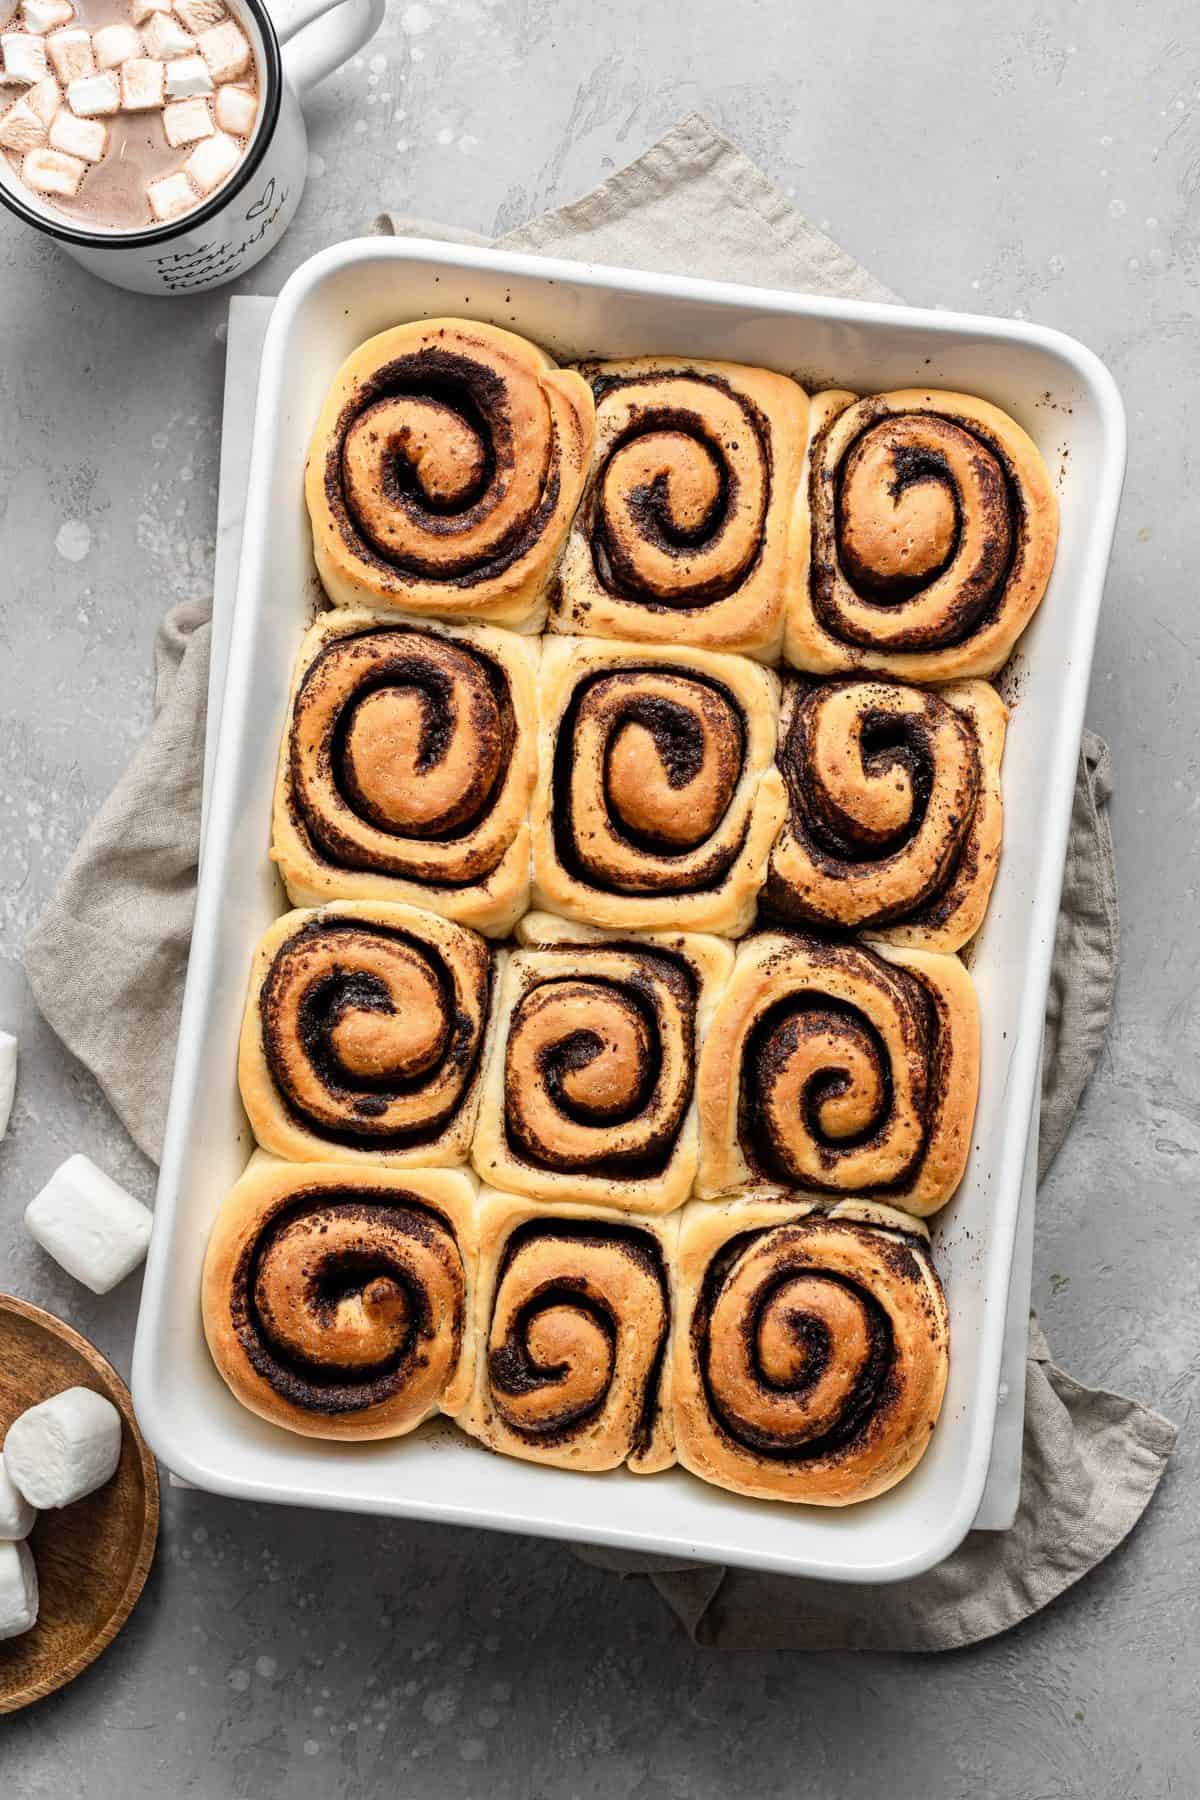 baked, unfrosted hot cocoa rolls in white tray